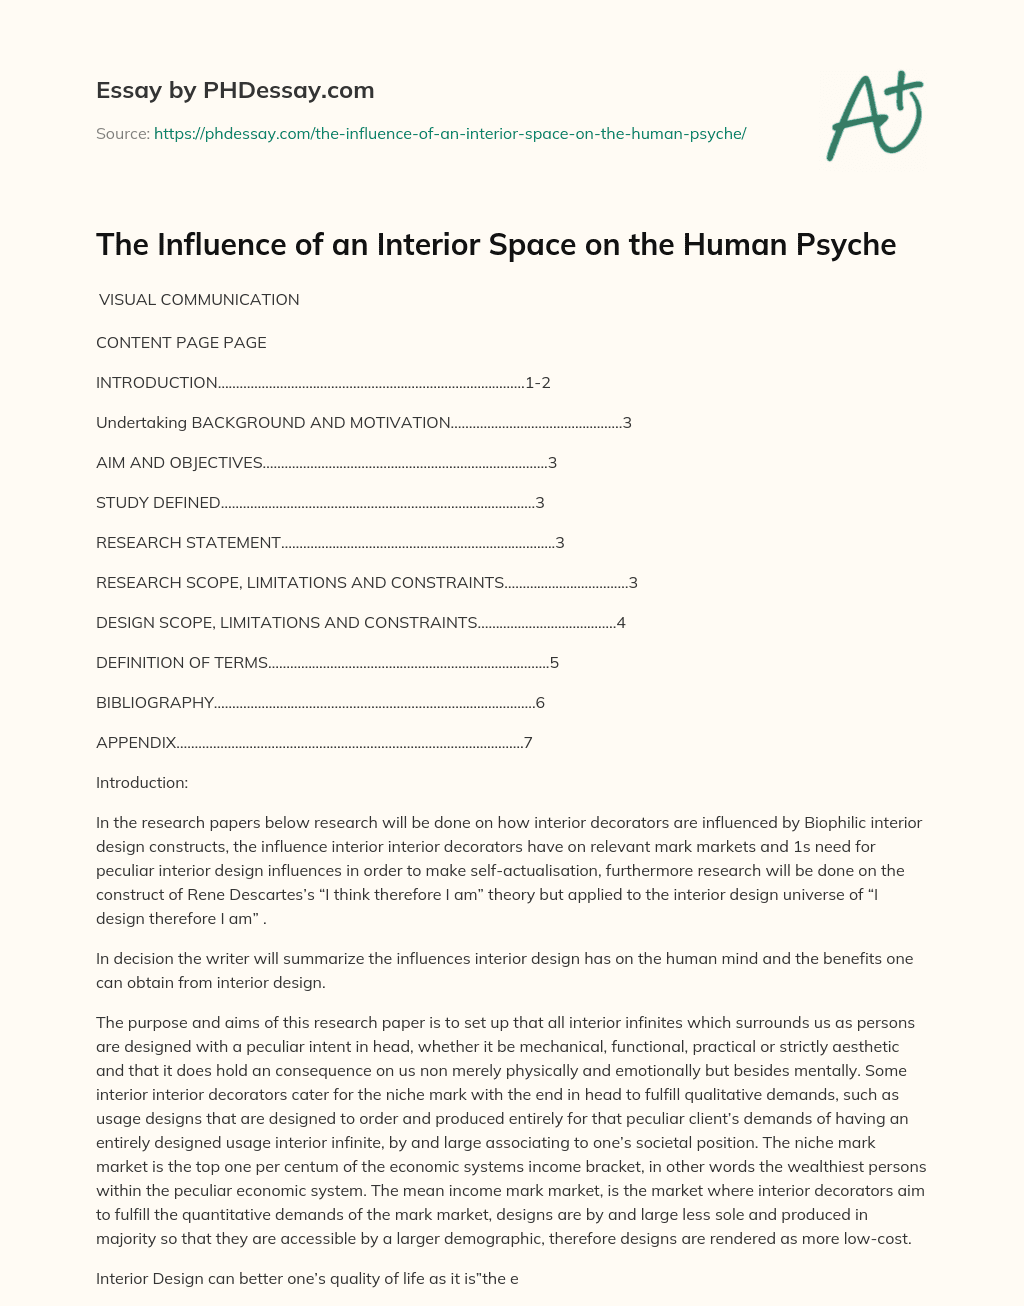 The Influence of an Interior Space on the Human Psyche essay